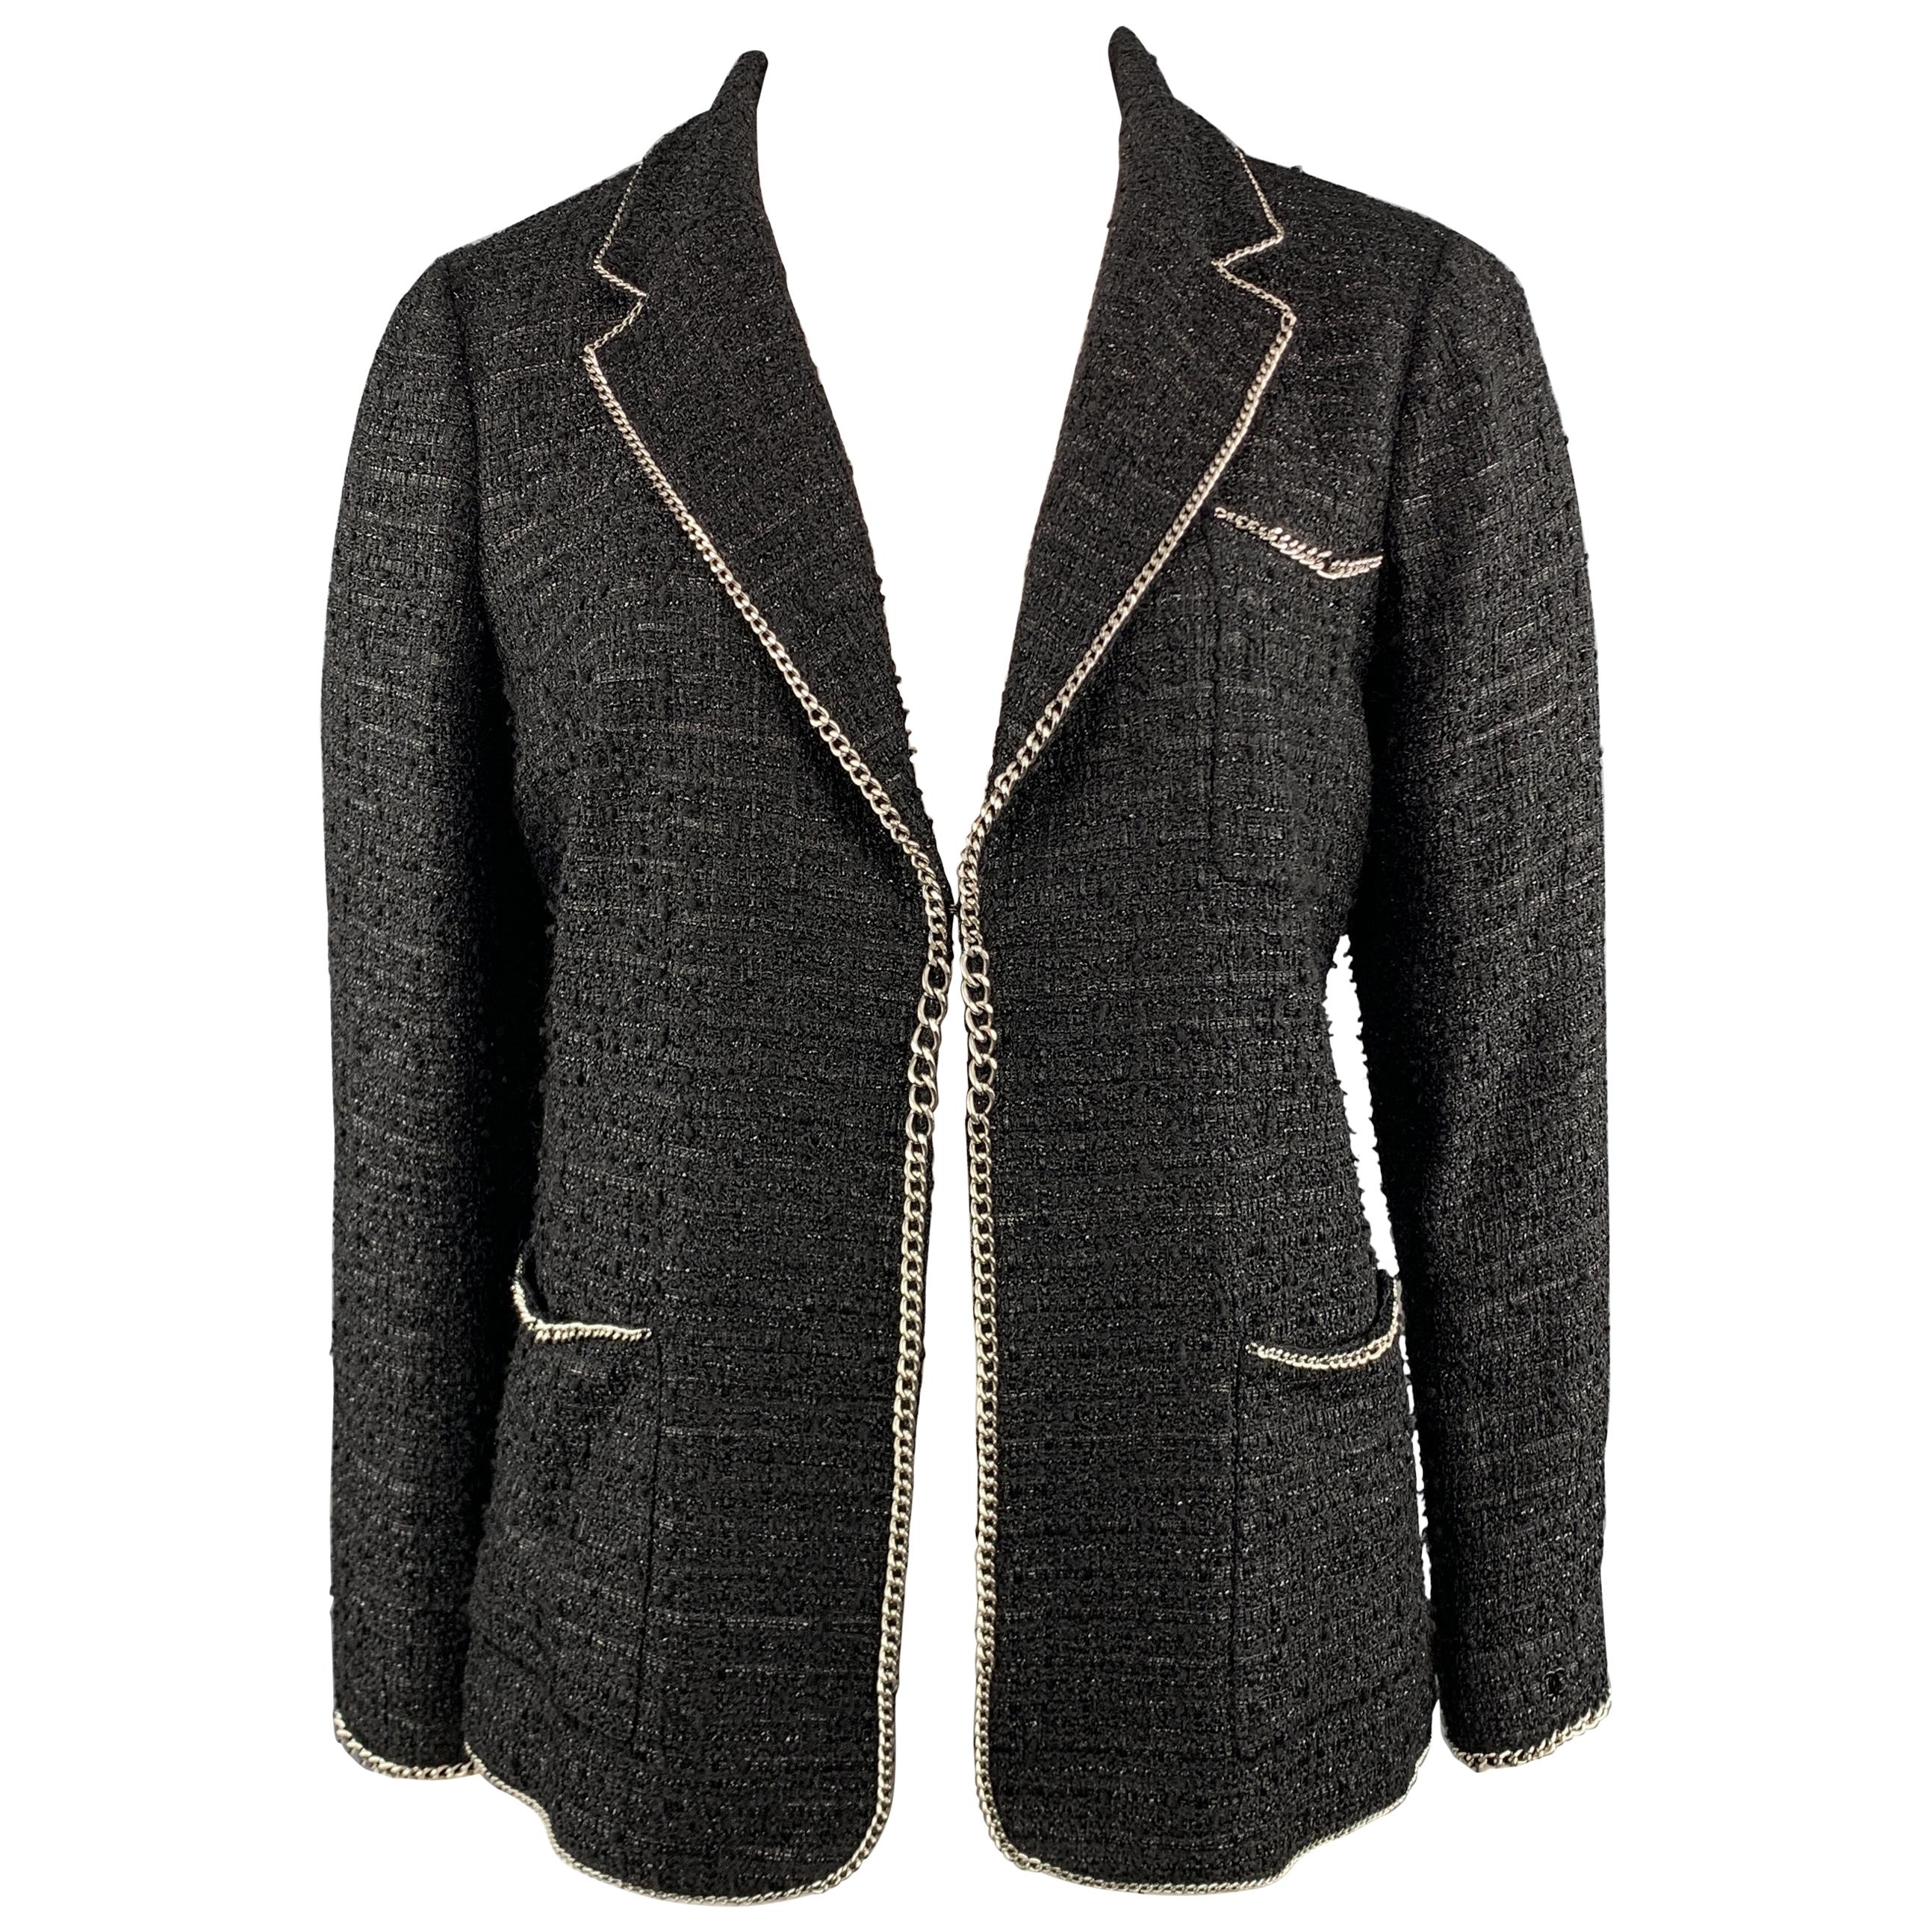 Bedford Grey Plaid Wool Blend Boucle Jacket - Custom Fit Tailored